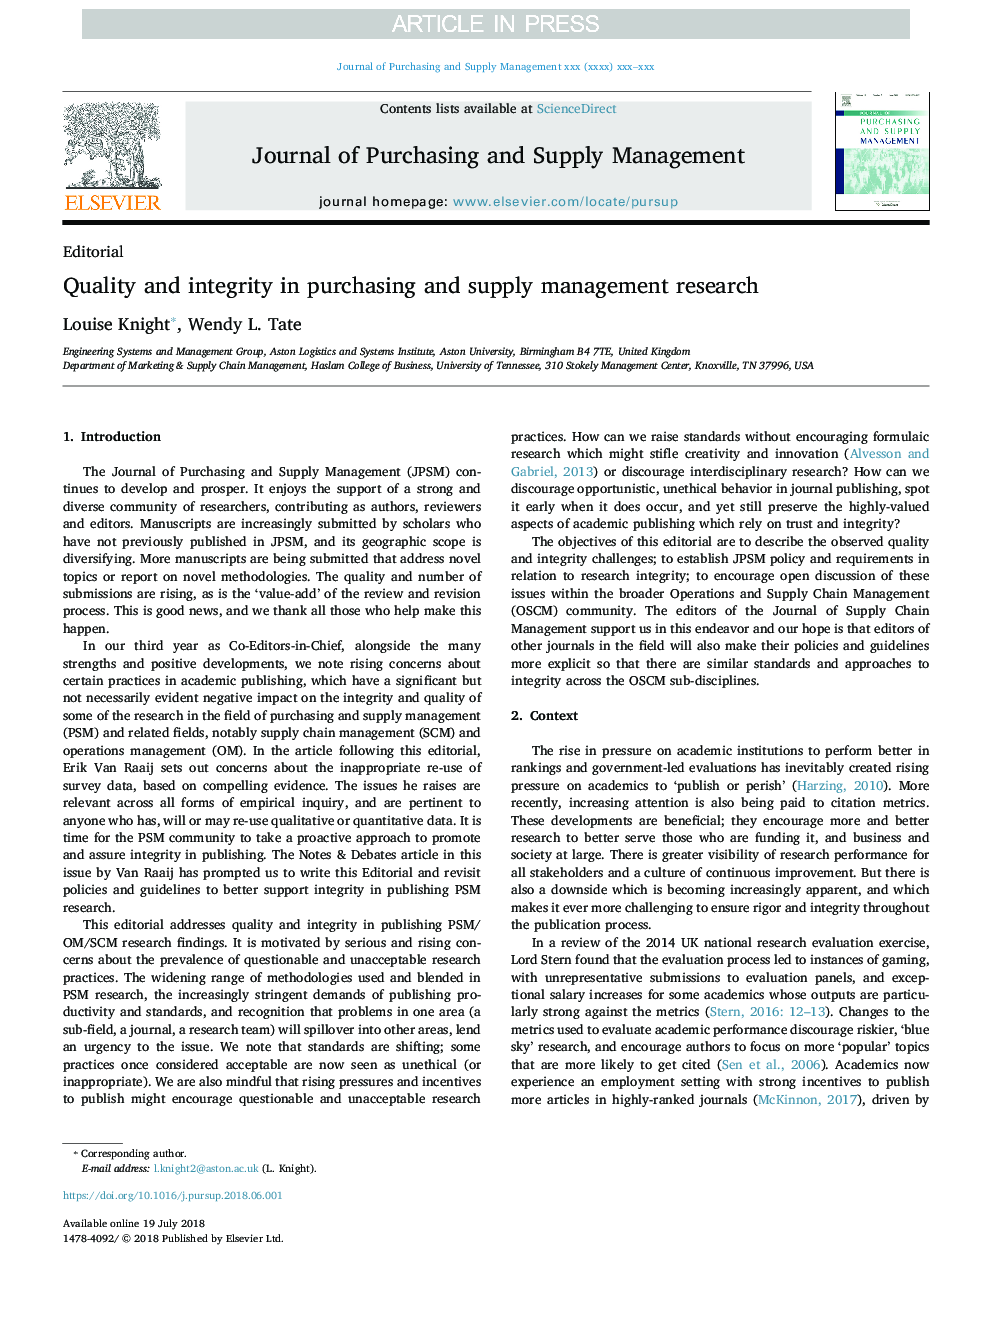 Quality and integrity in purchasing and supply management research